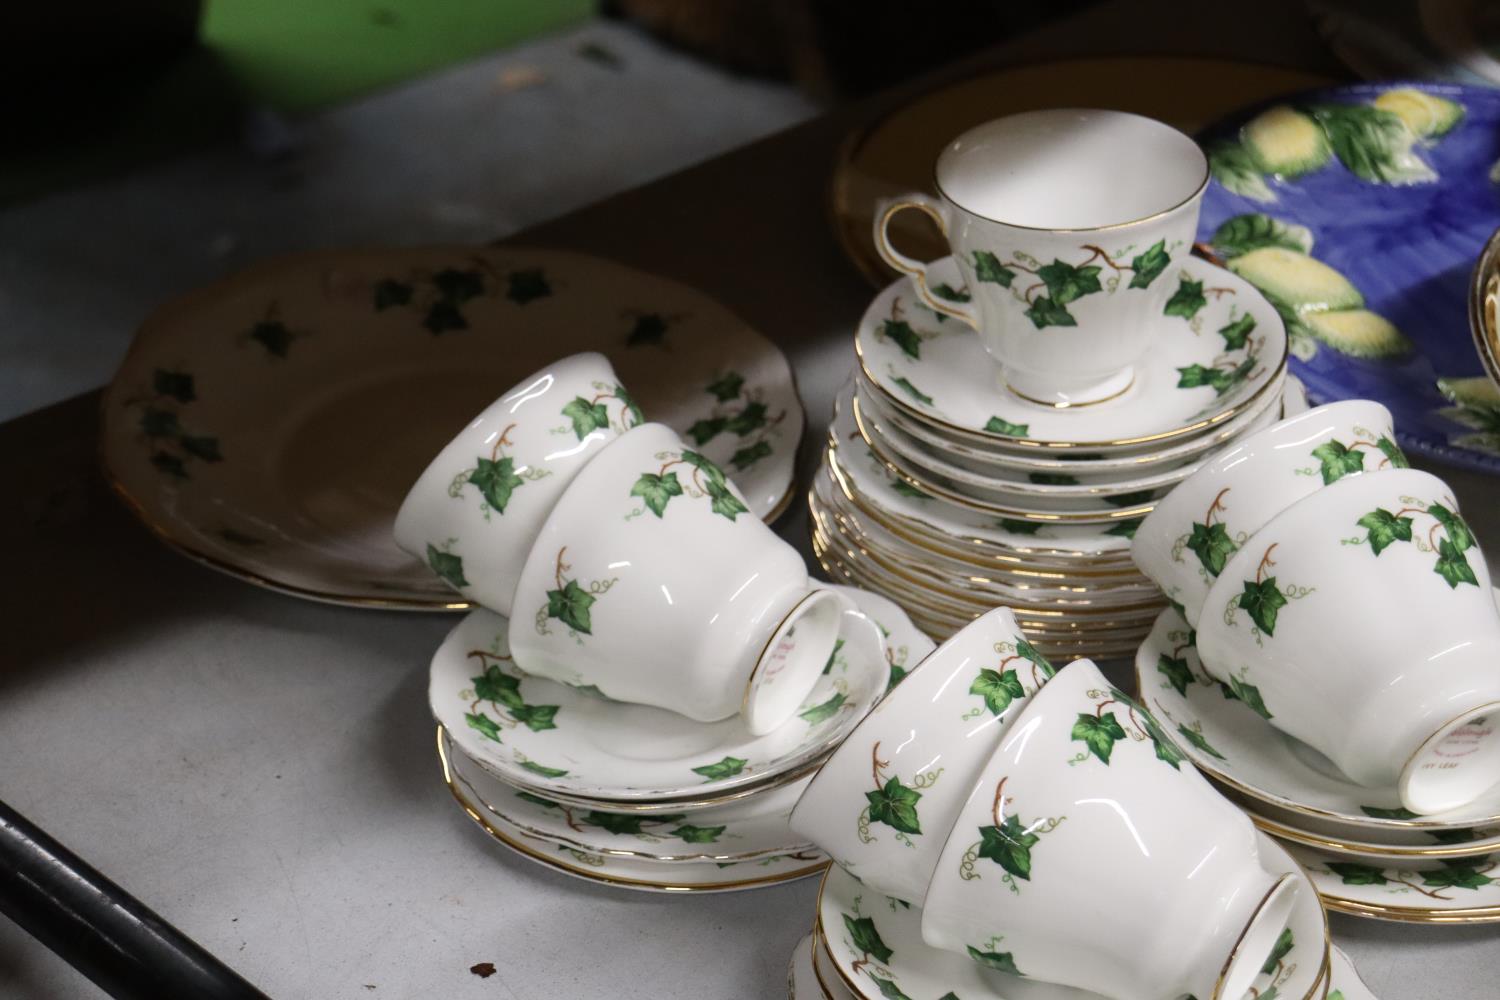 A COLCLOUGH 'IVY LEAF' PART TEASET TO INCLUDE CAKE PLATES, A CREAM JUG, CUPS, SAUCERS AND SIDE - Image 2 of 6